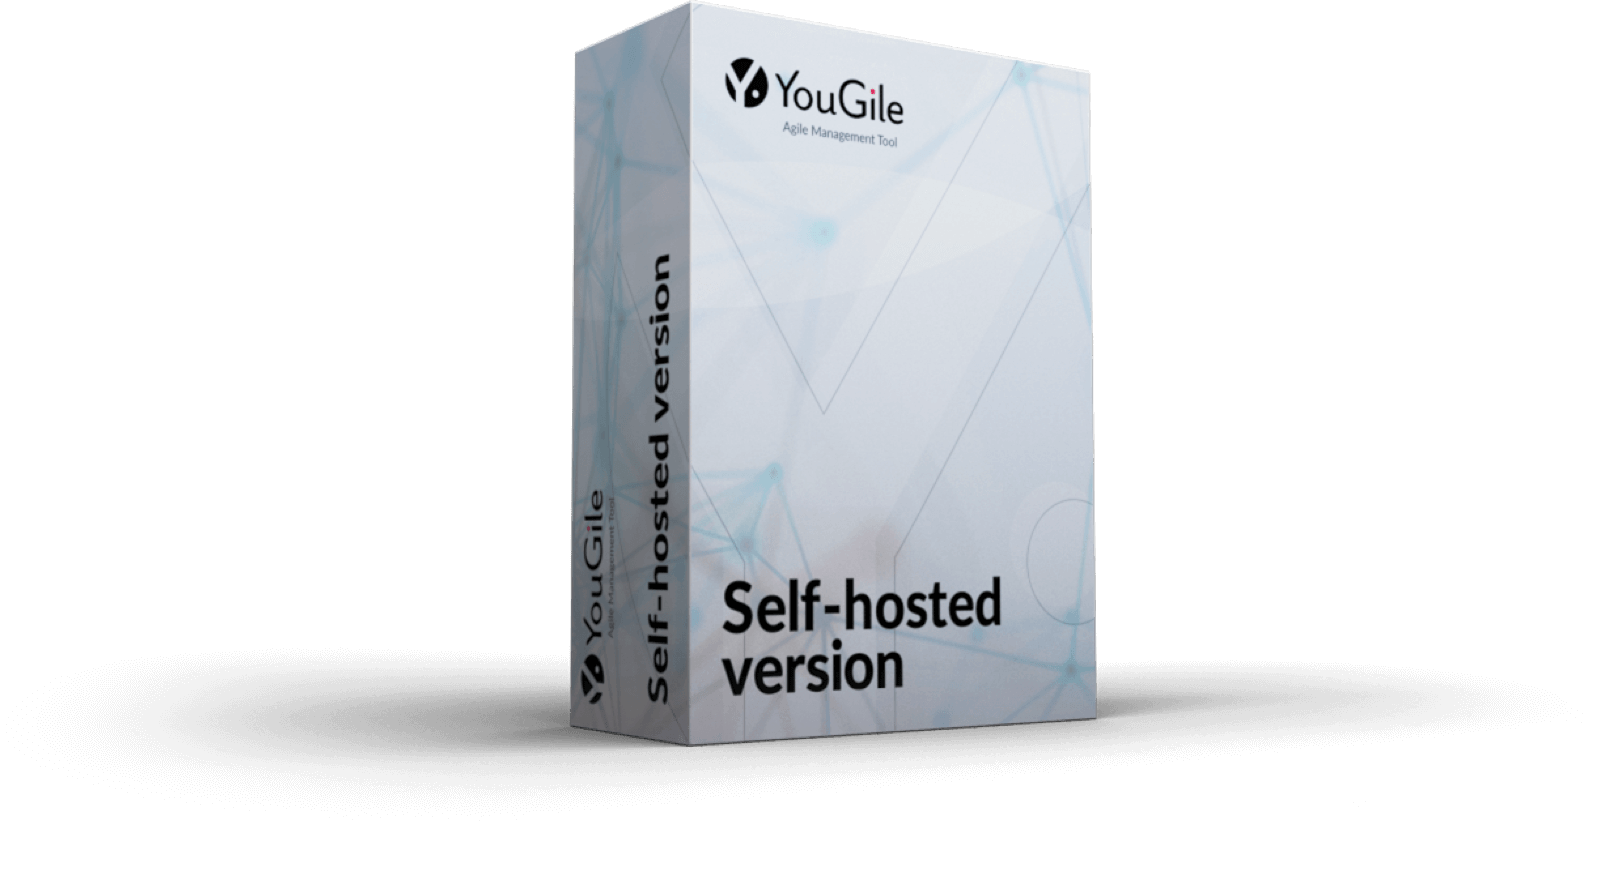 Self-hosted version of YouGile